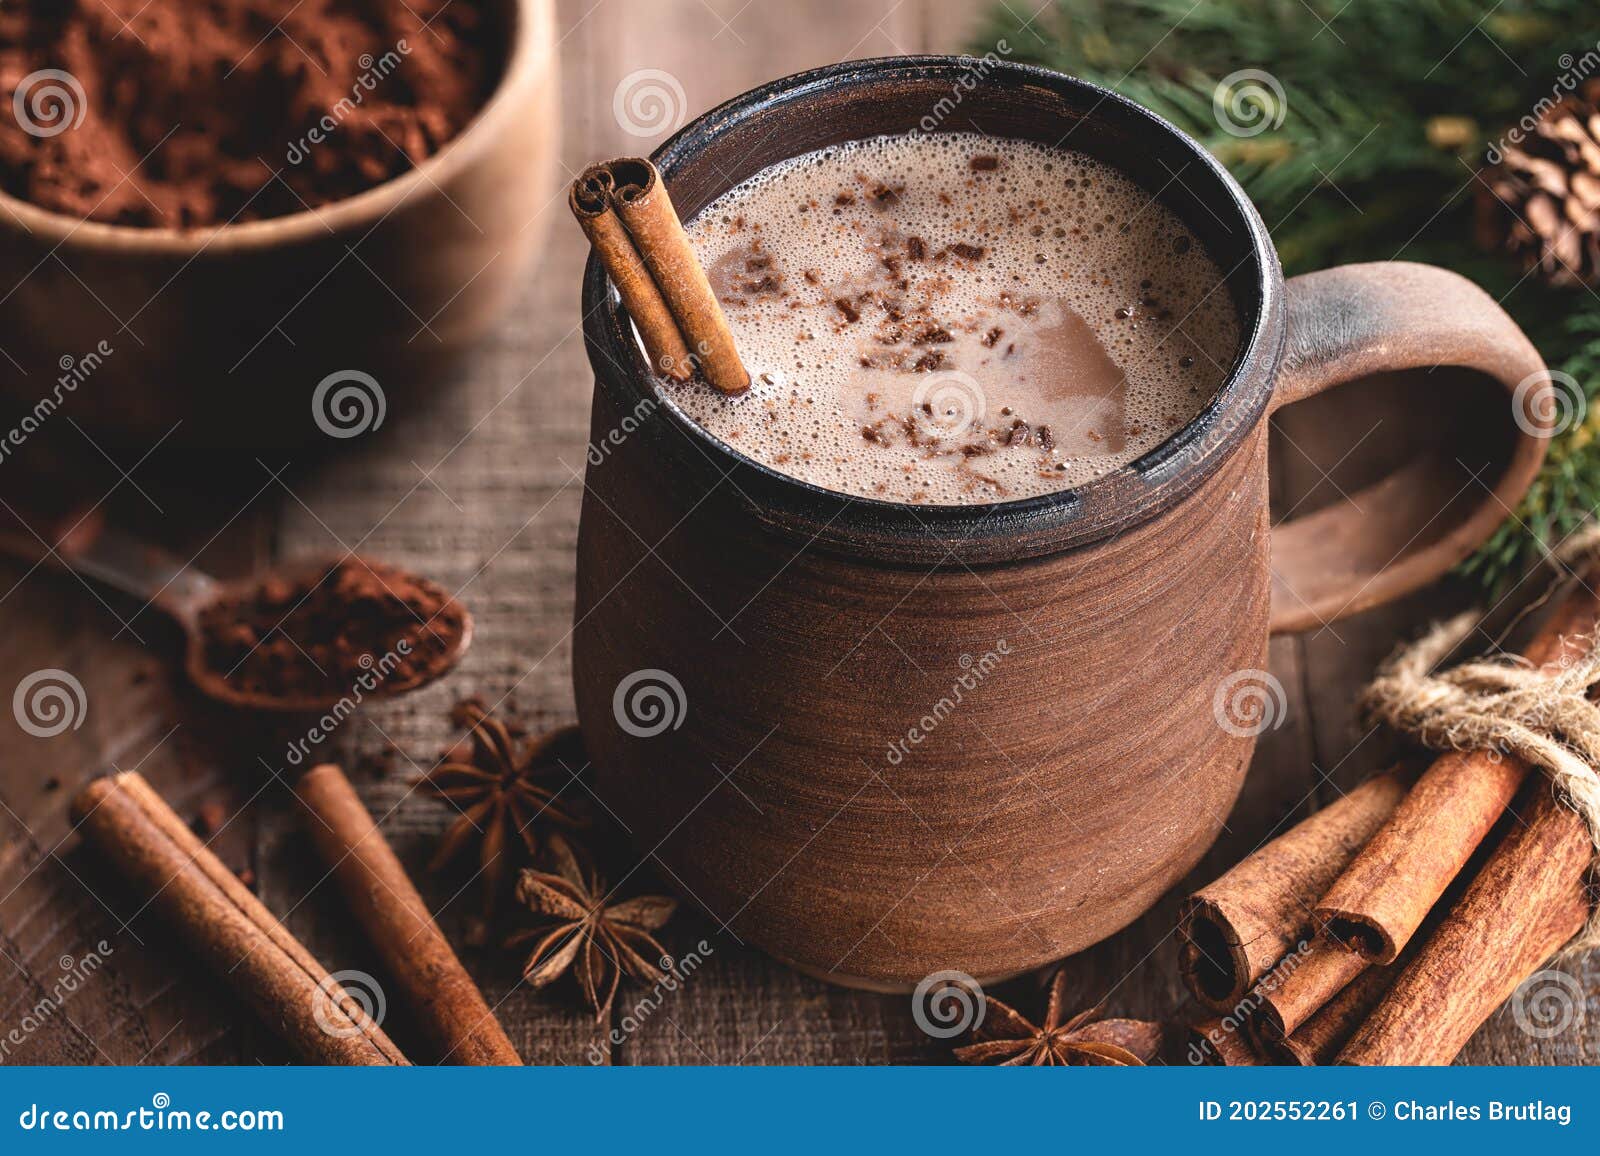 cup of hot chocolate with cinnamon stick